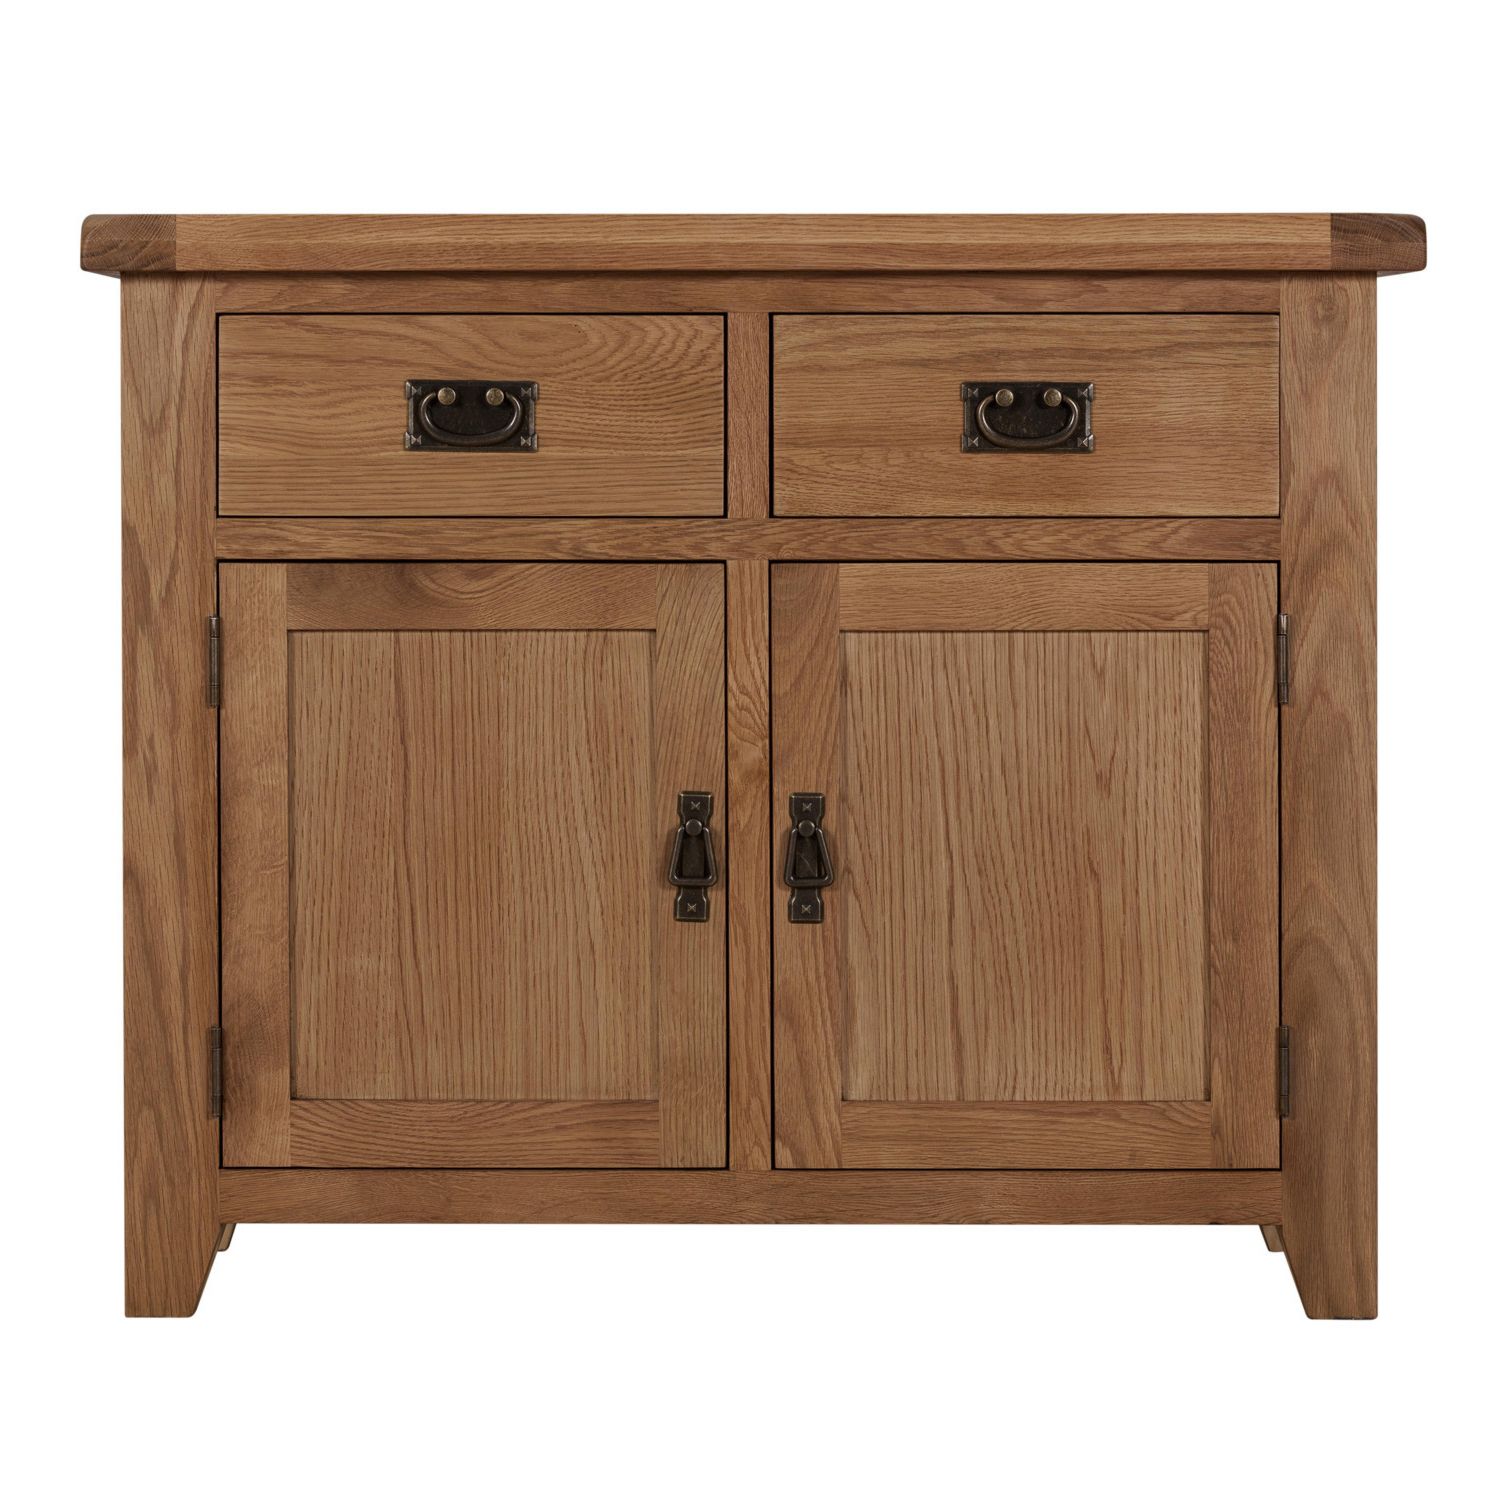 Kinsale Two Door Two Drawer Sideboard For Most Recently Released Vintage Finish 4 Door Sideboards (View 11 of 20)